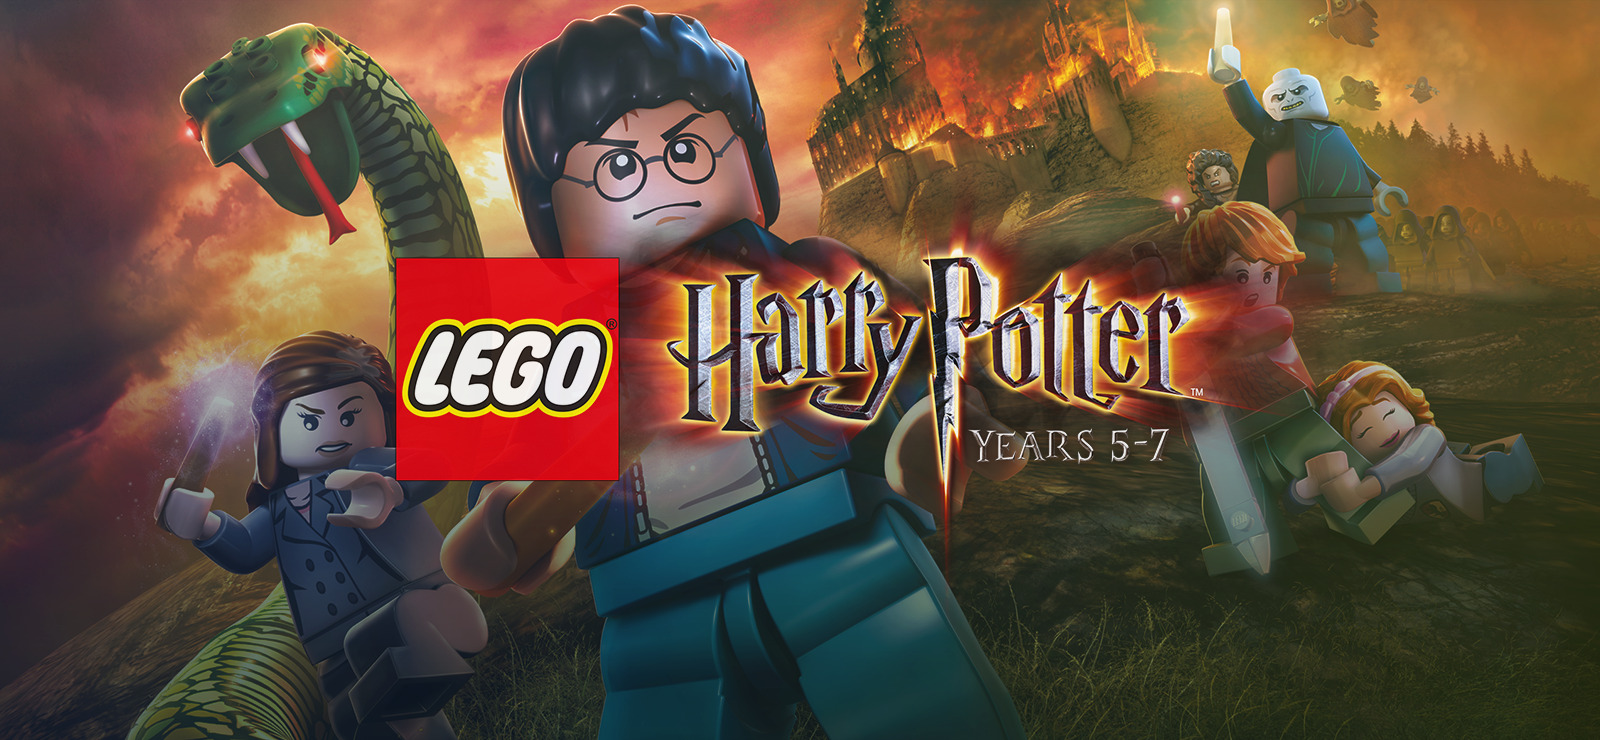 LEGO Harry Potter: Years 5-7 on